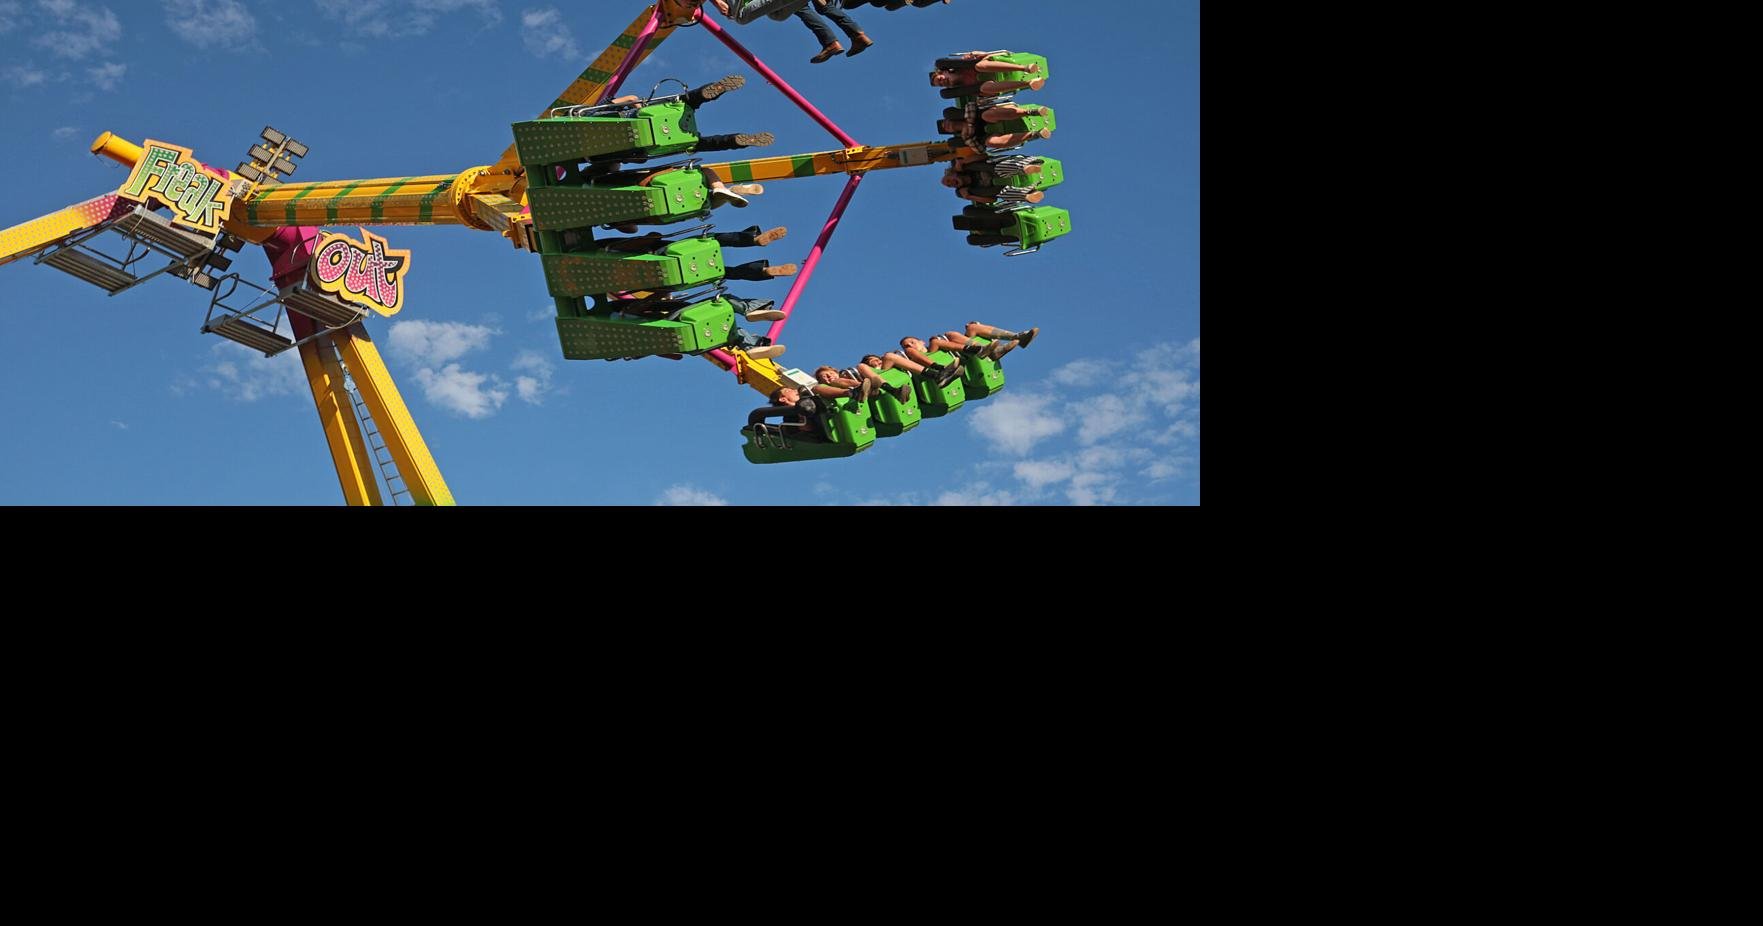 Discounted tickets to Mother Lode Fair on sale through Wednesday News